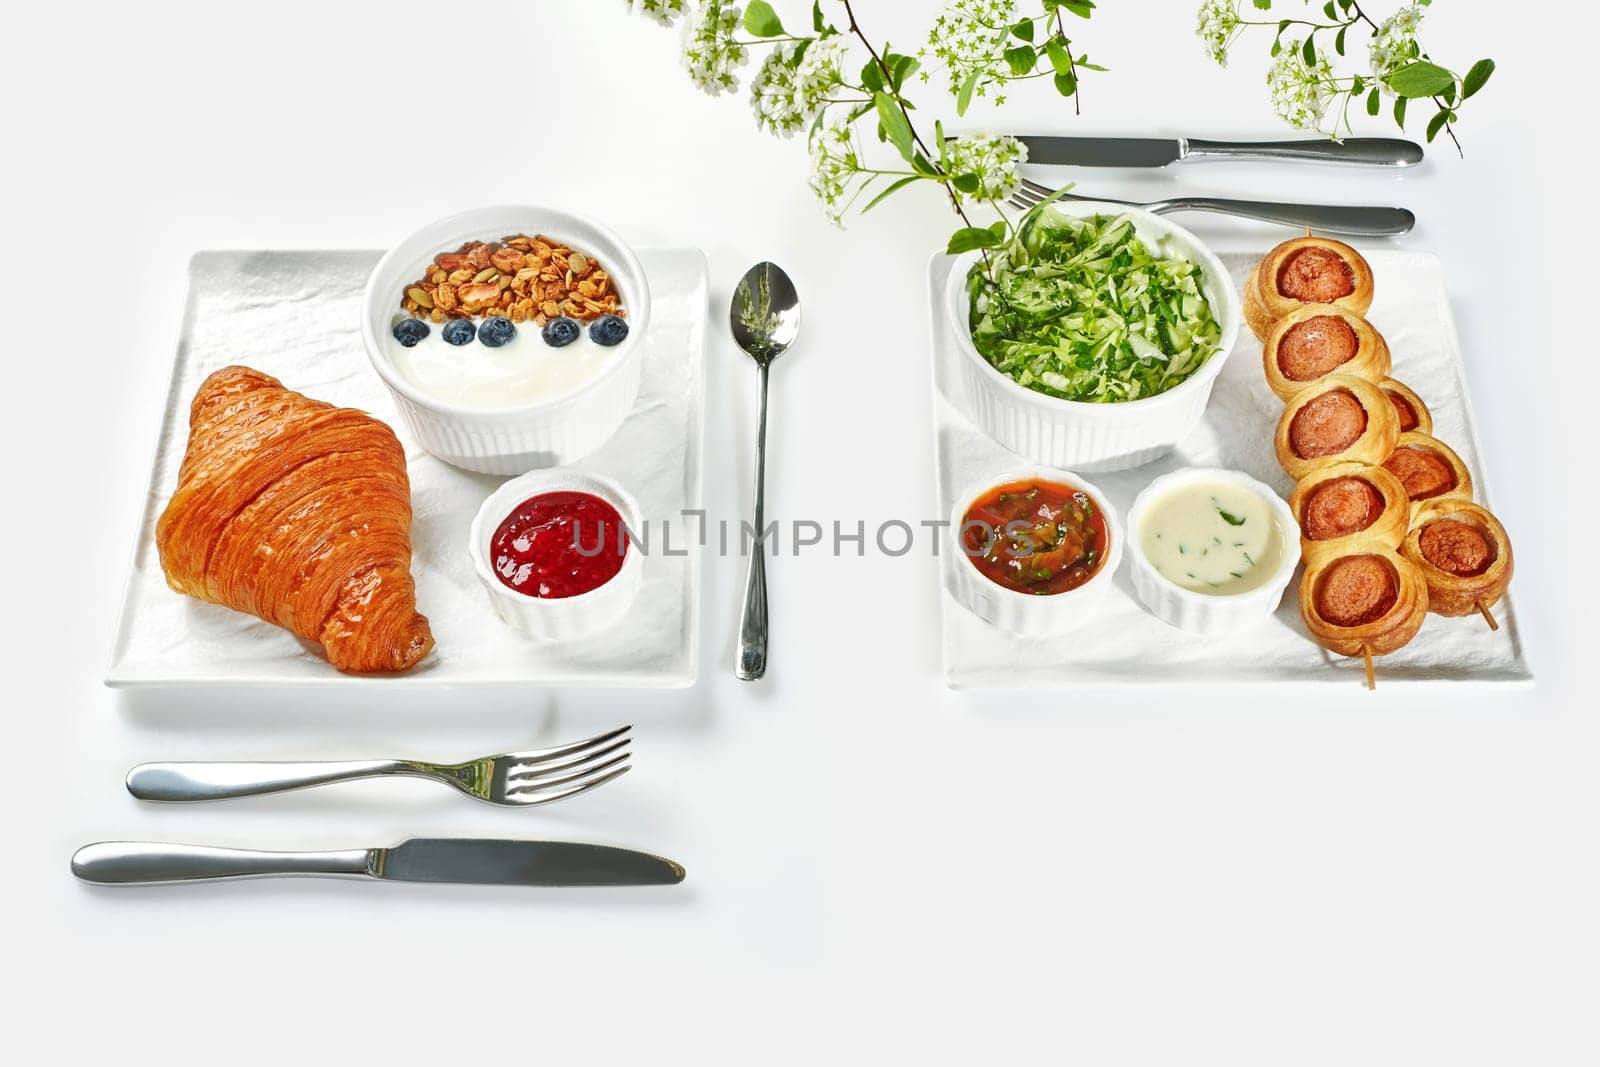 Delightful breakfast arrangement with golden croissant, granola, yogurt, sausages in brioche on skewers, green salad, and dips on clean white setting decorated with tender flowers